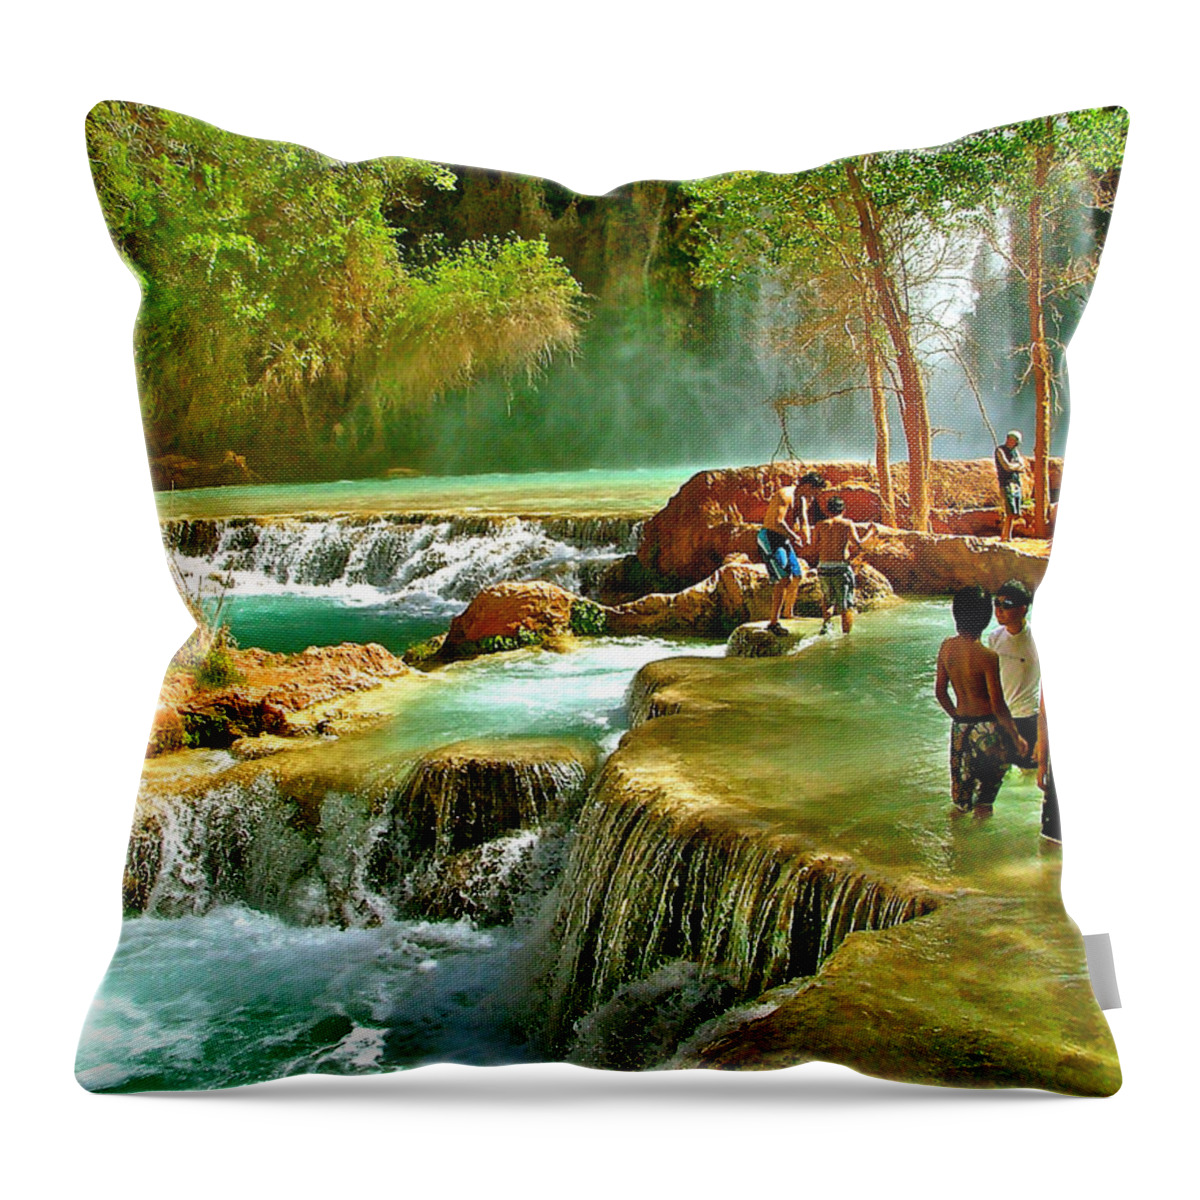 Water Falls Throw Pillow featuring the photograph Eden's Terraced Falls by Brent Sisson